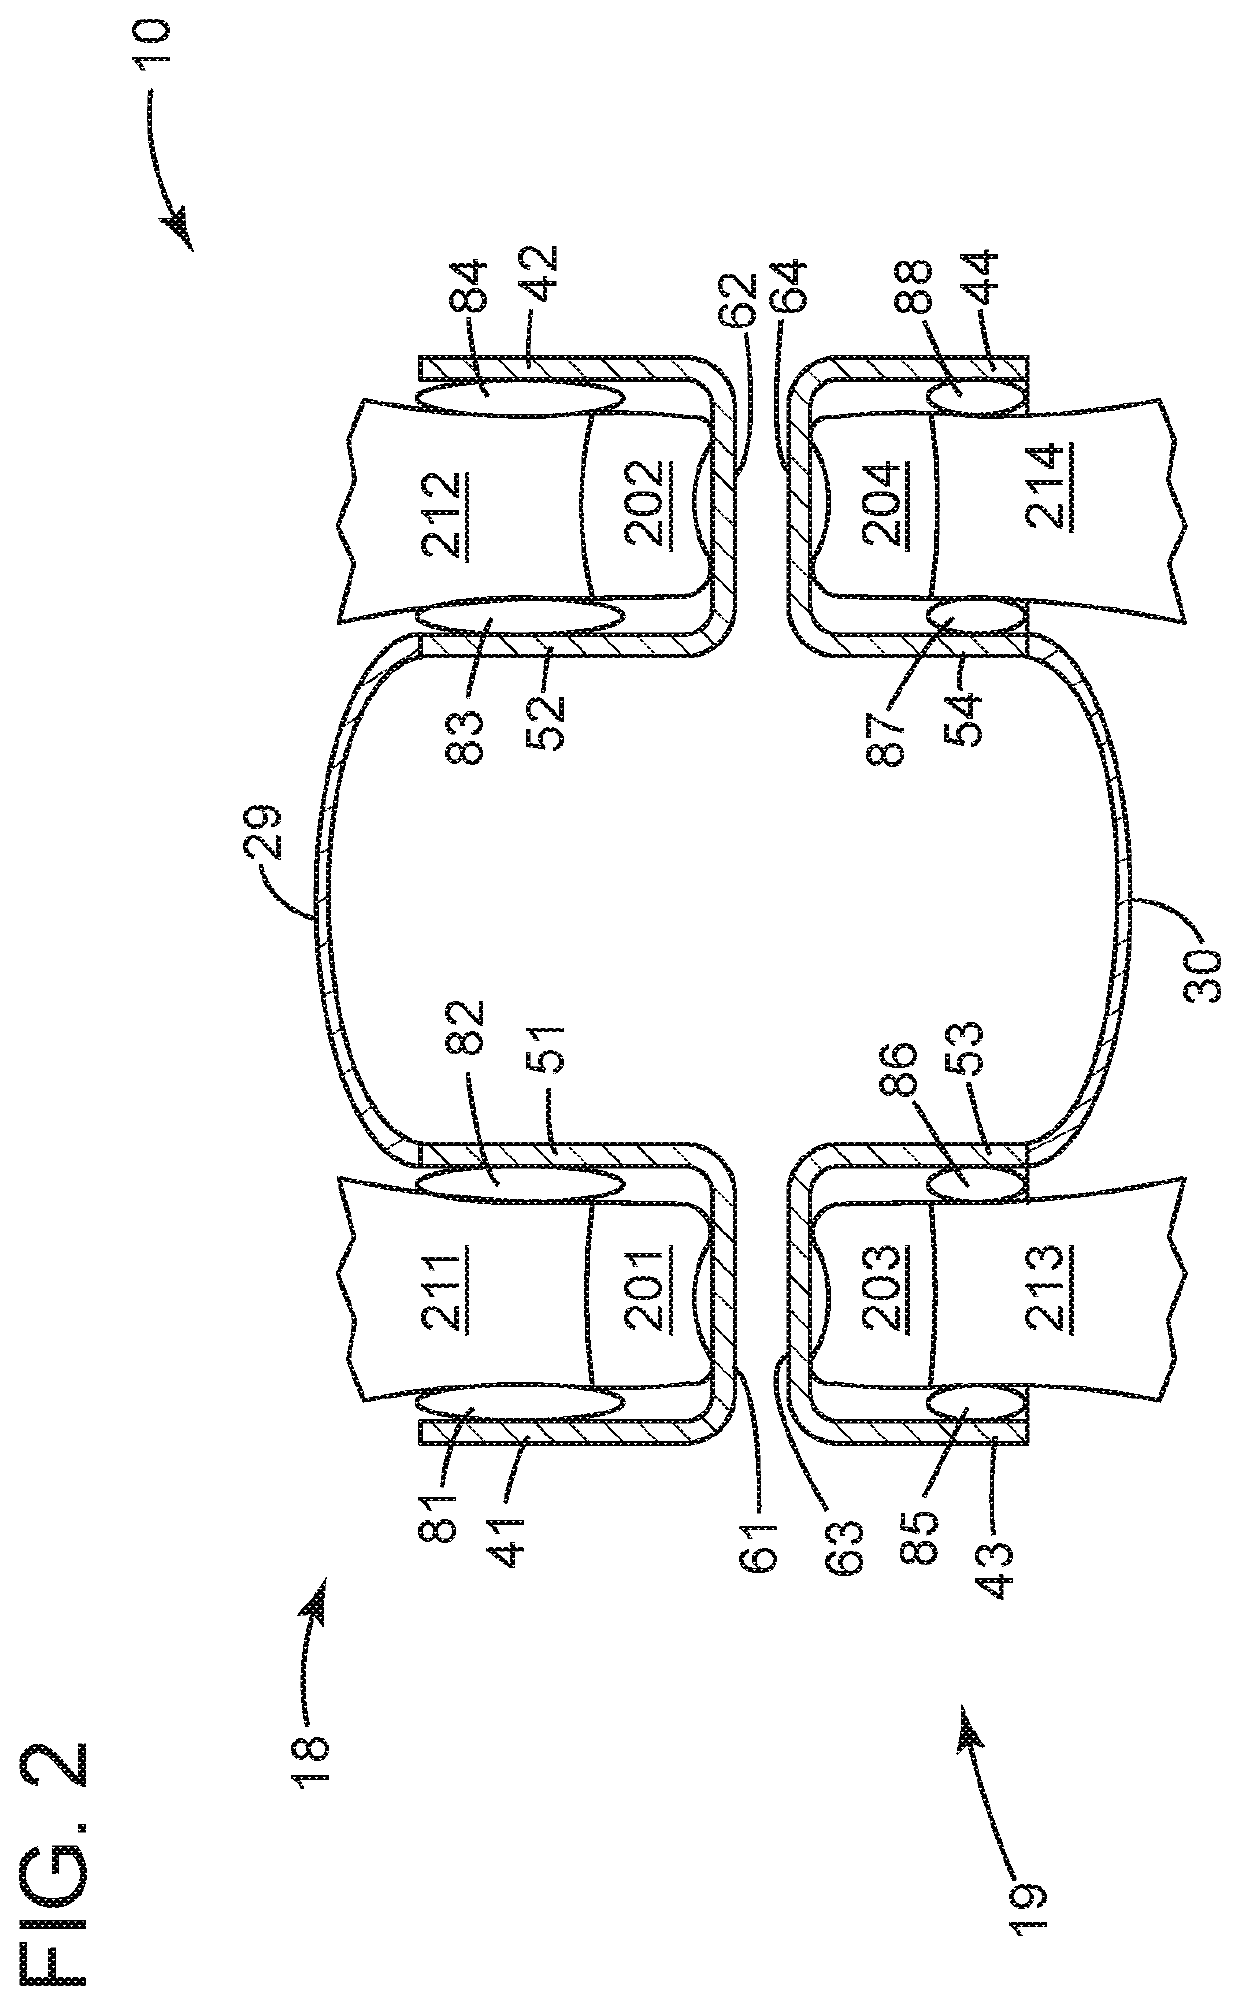 Hand-held therapeutic oral device for cooling of oral tissue of a user